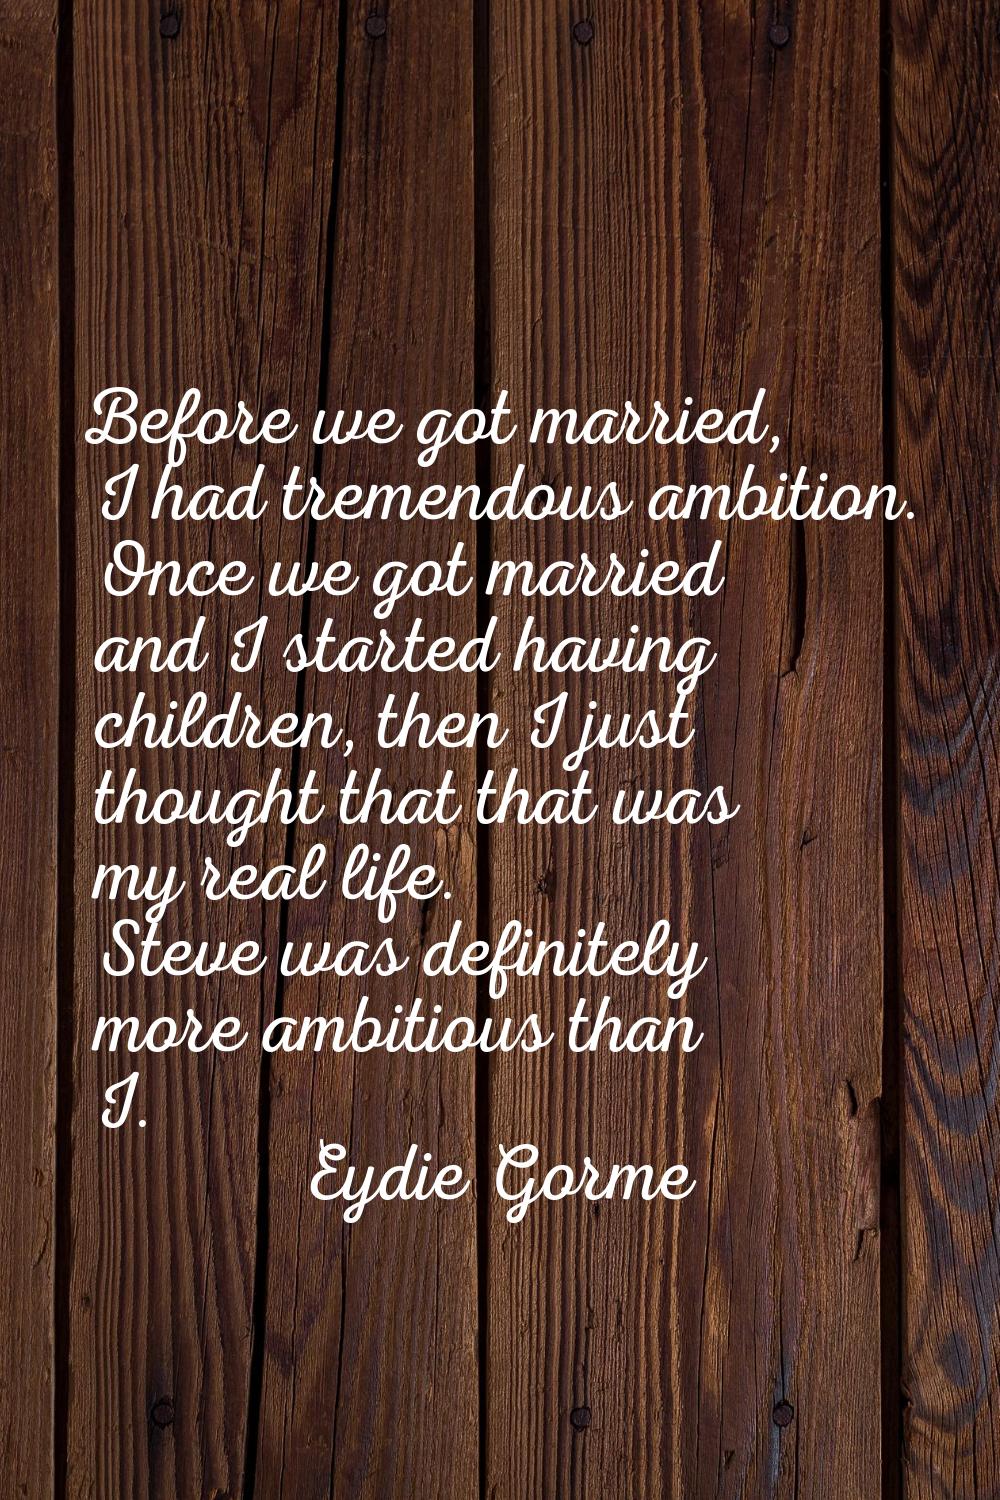 Before we got married, I had tremendous ambition. Once we got married and I started having children